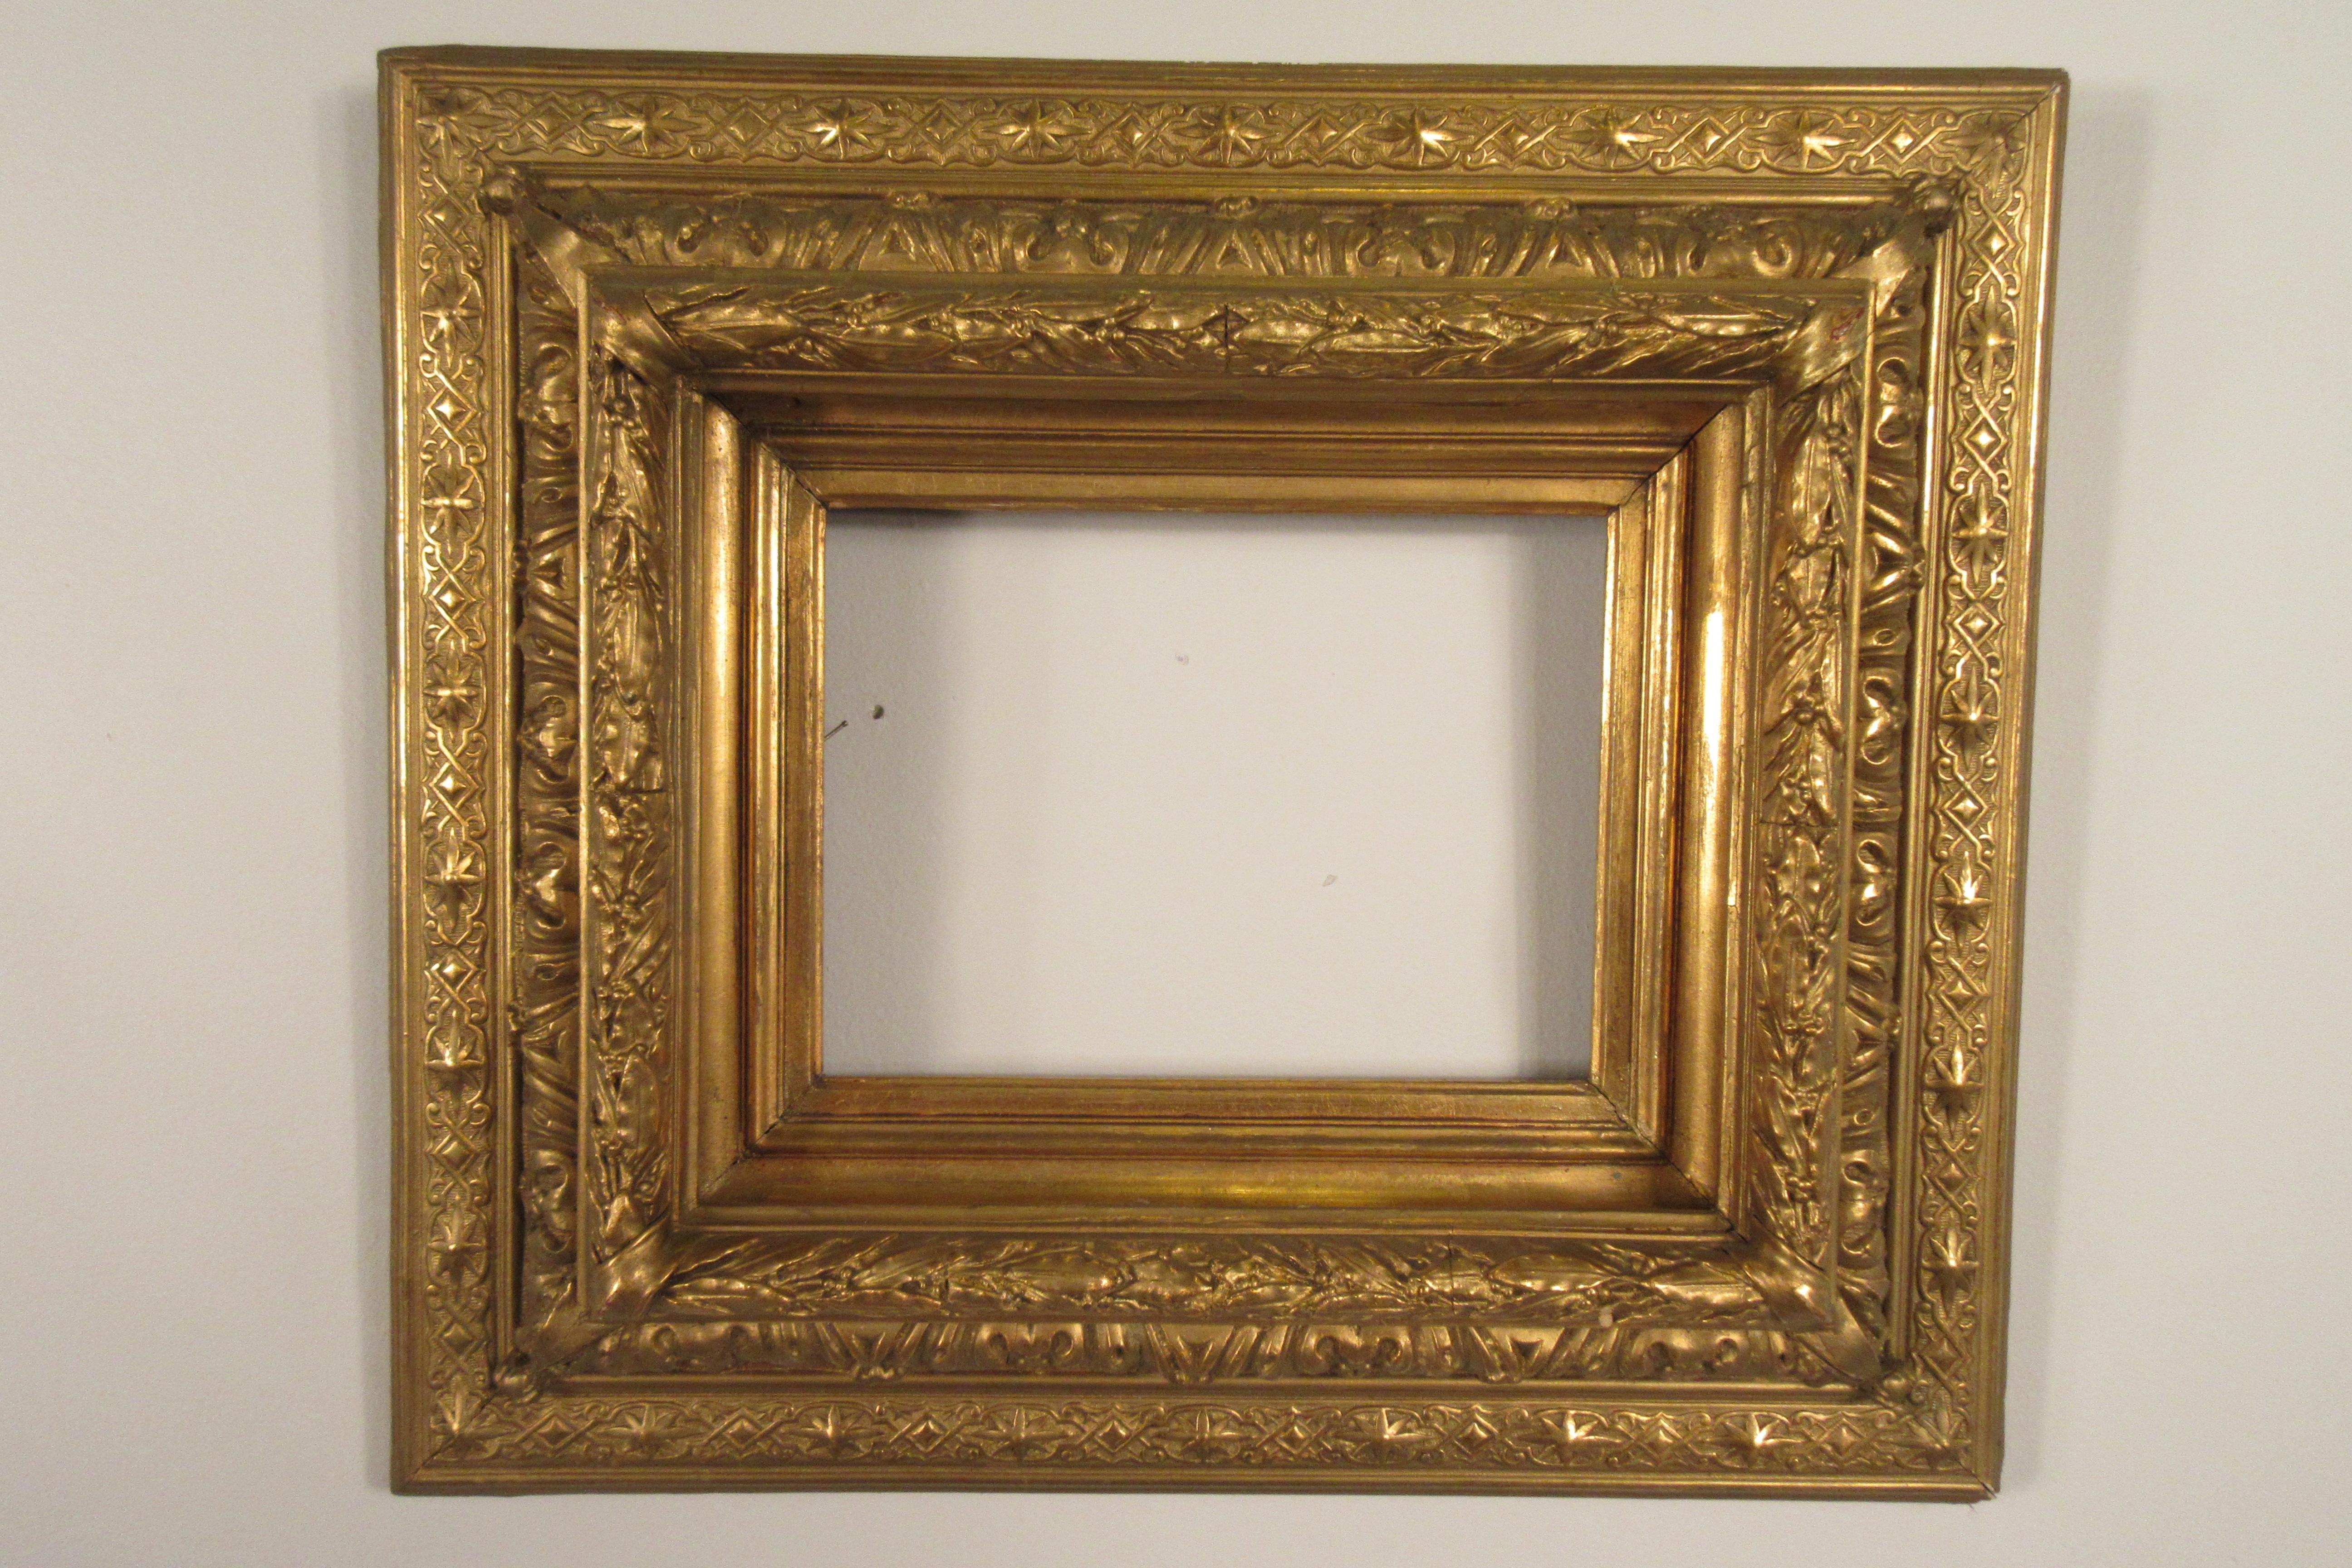 Pair of 19th century gilt gesso frames. 3 pieces of gesso are missing off the frame. 
I recently found one  large piece of gesso molding that needs to be put back onto the frame. There is no picture yet of the frame with this piece reattached.